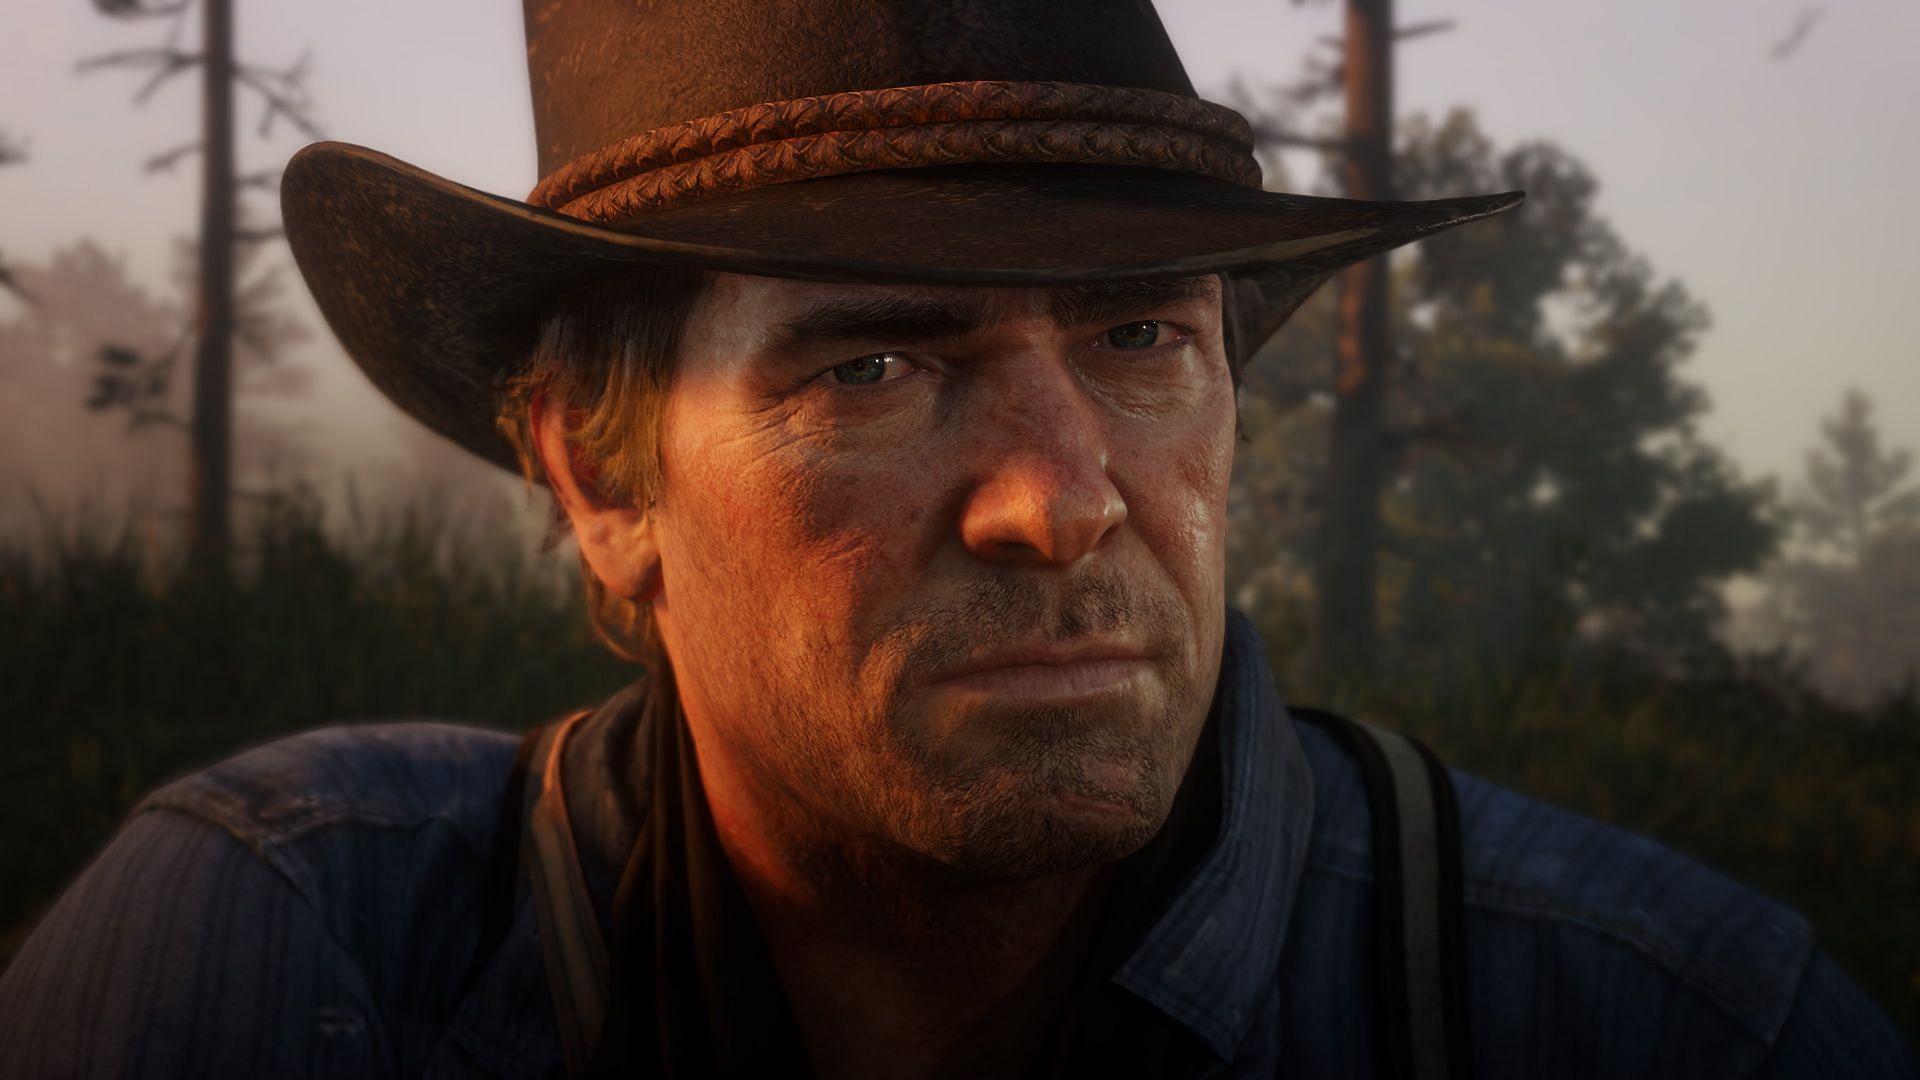 10 things you did not know about Arthur Morgan in Red Dead Redemption 2.